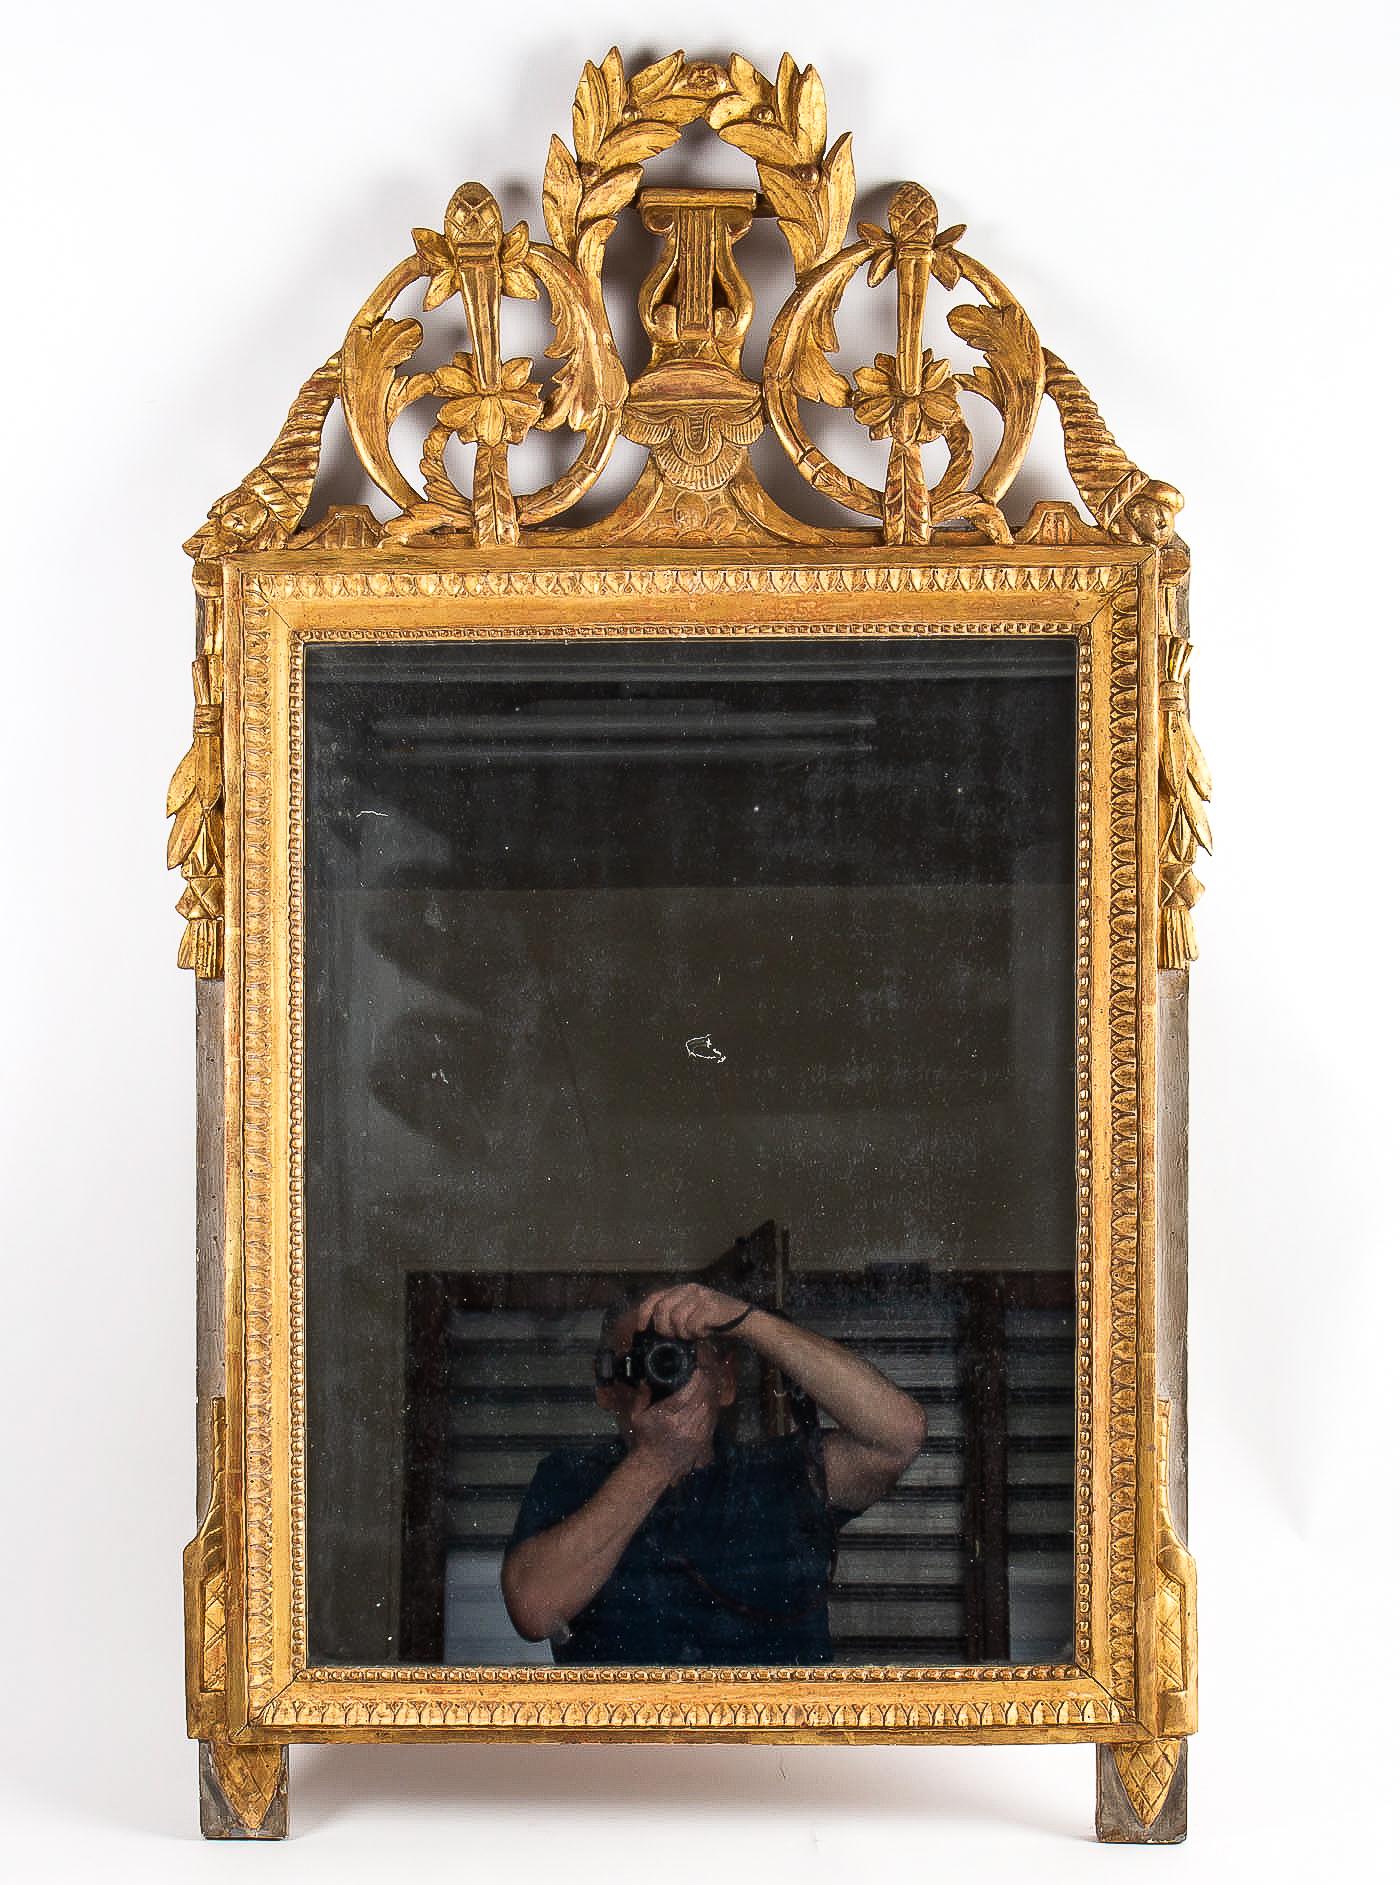 Provence Louis XVI Period gilt and lacquered wood front top mirror, circa 1780

A gorgeous and decorative French hand-carved gilt and lacquered wood front top mirror.
Our mirror presents great hearts and pearls frieze decoration, topped with a